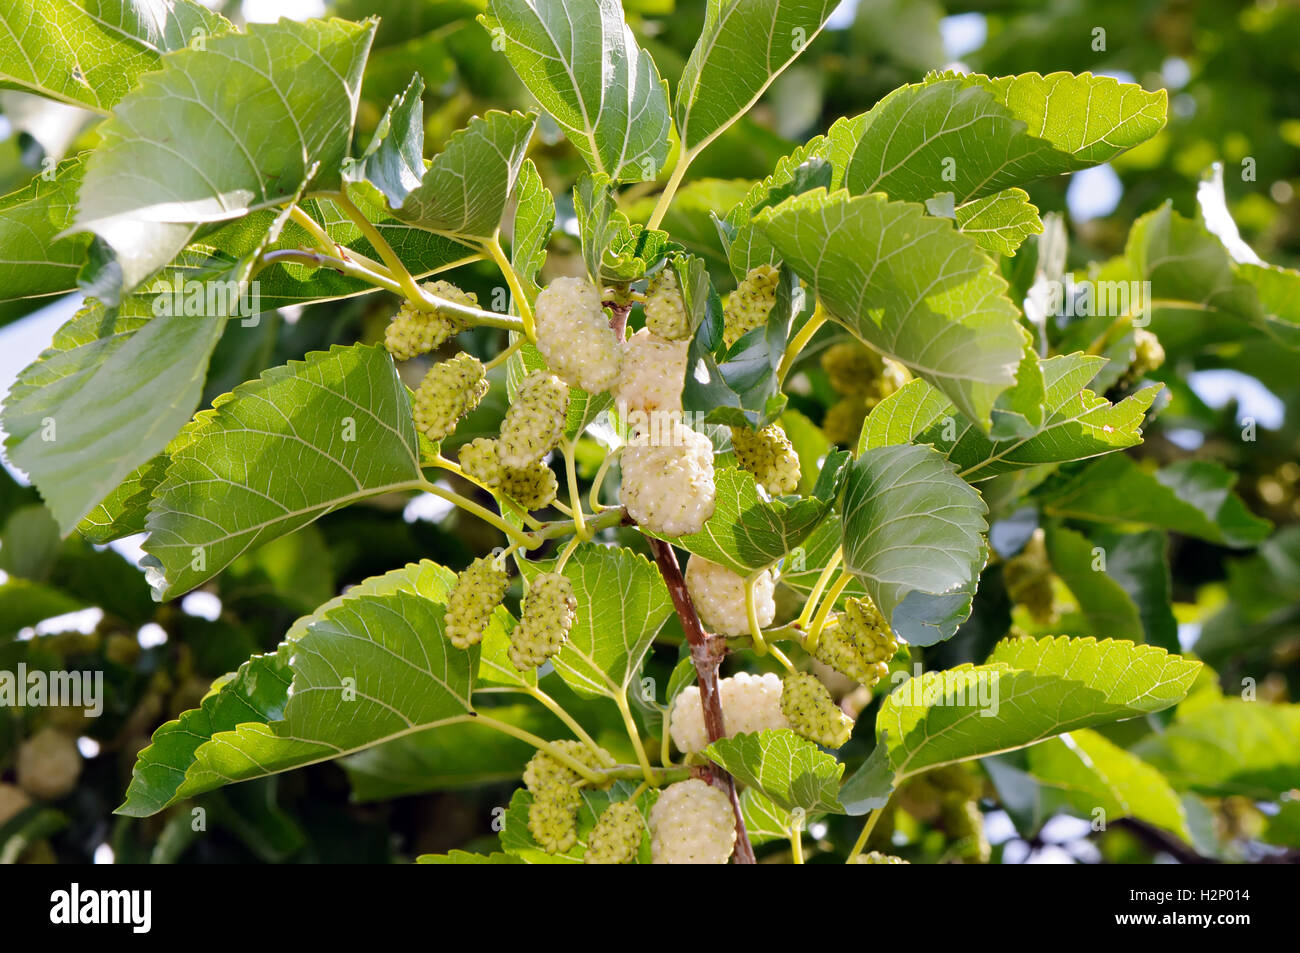 Fruits and leaves of White mulberry (Morus alba). Stock Photo